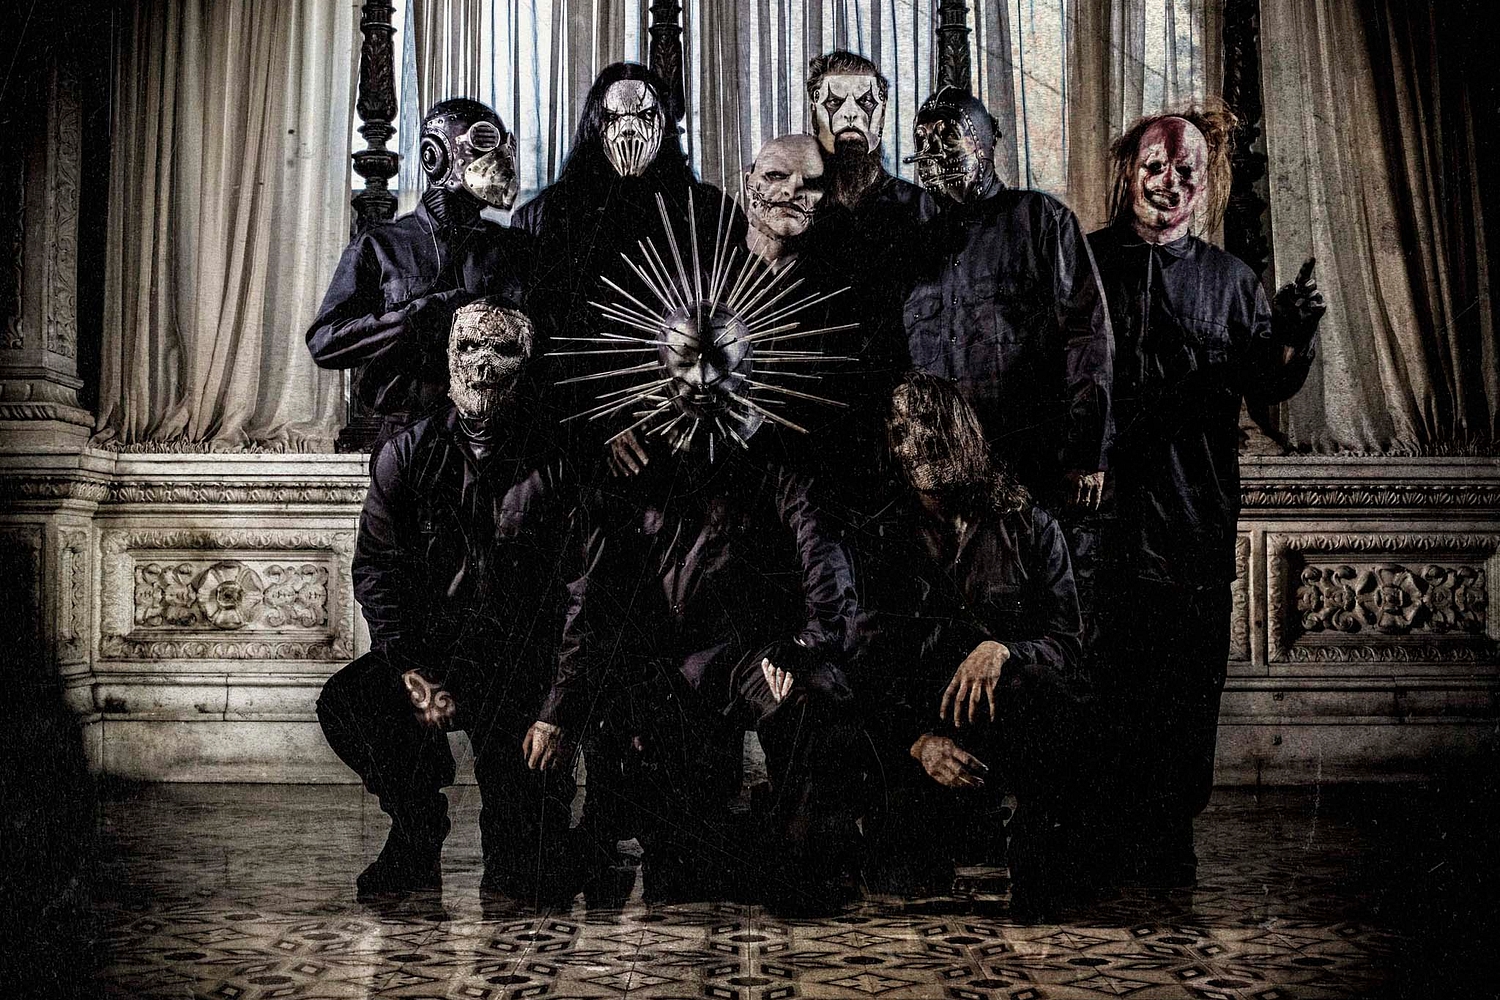 Slipknot: “We needed the time to grieve”